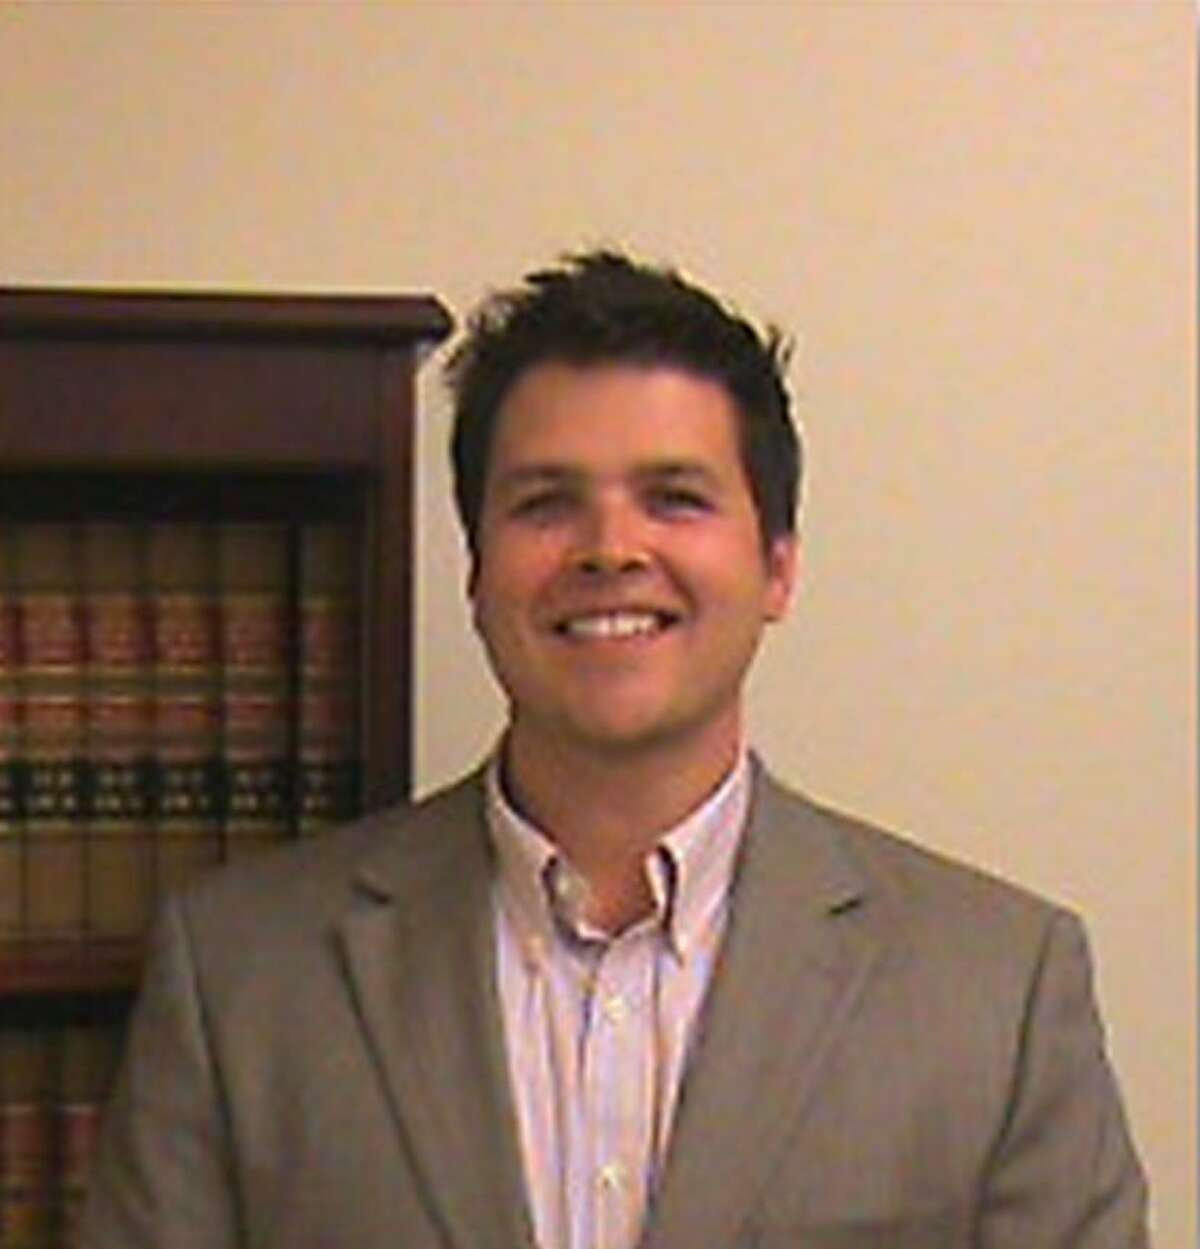 Guadalupe County Attorney Dave Willborn was in private practice when the disputed car sale occurred.